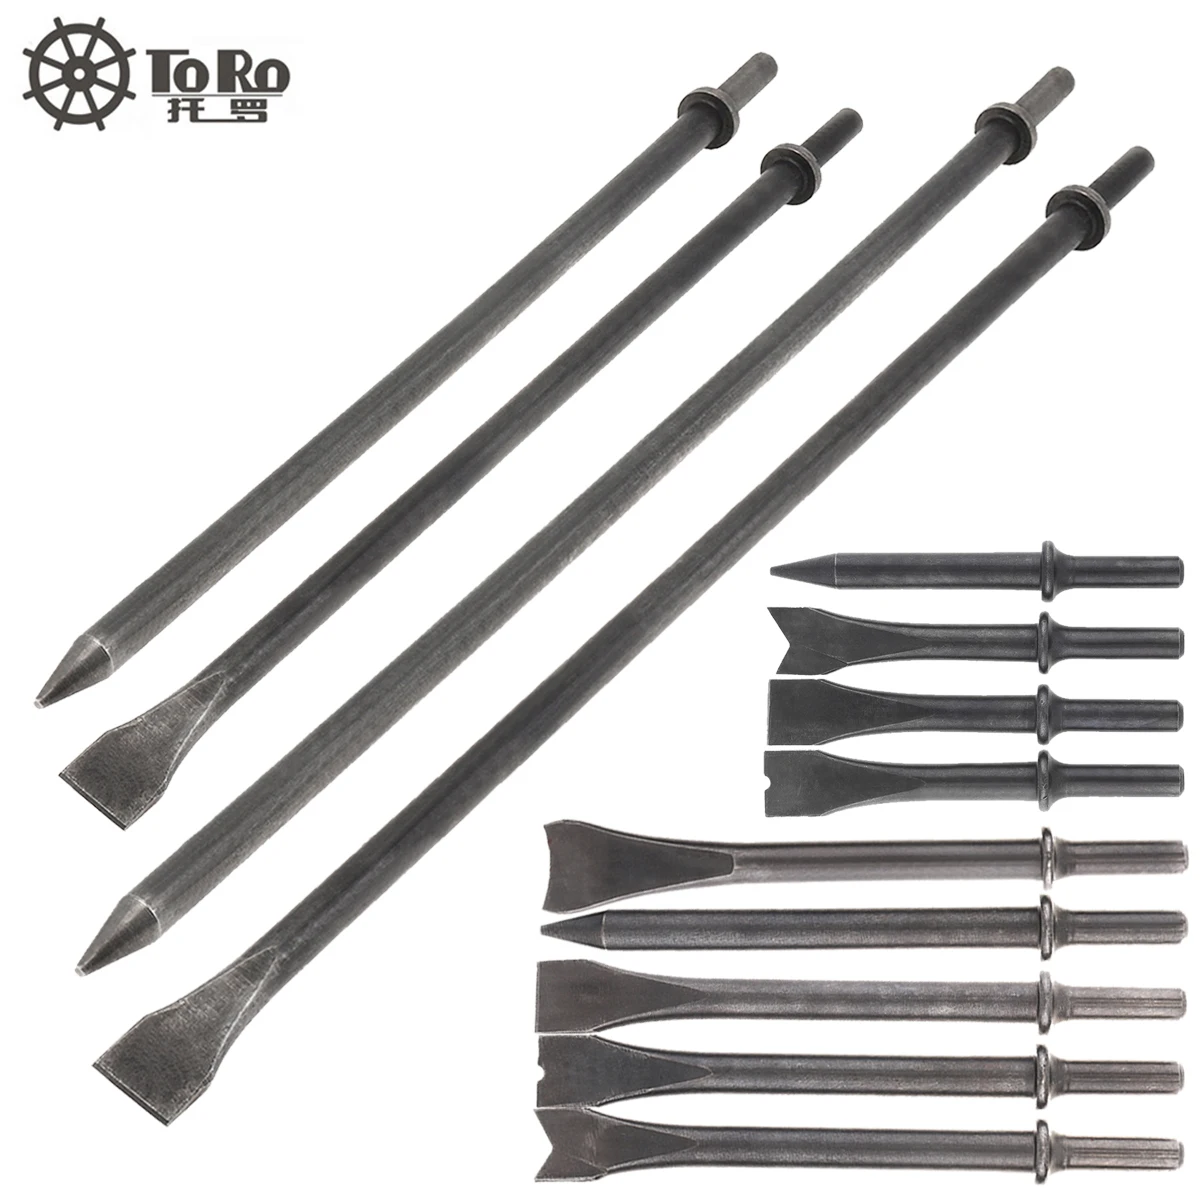 4/5pcs/set Air Chisel Impact Head Hard 45# Steel 125/175mm Solid Long Impact Head Support PneumaticTool for Cutting Removal stainless steel purification water purifier filter tap kitchen faucet attach filter cartridges rust bacteria removal percolator